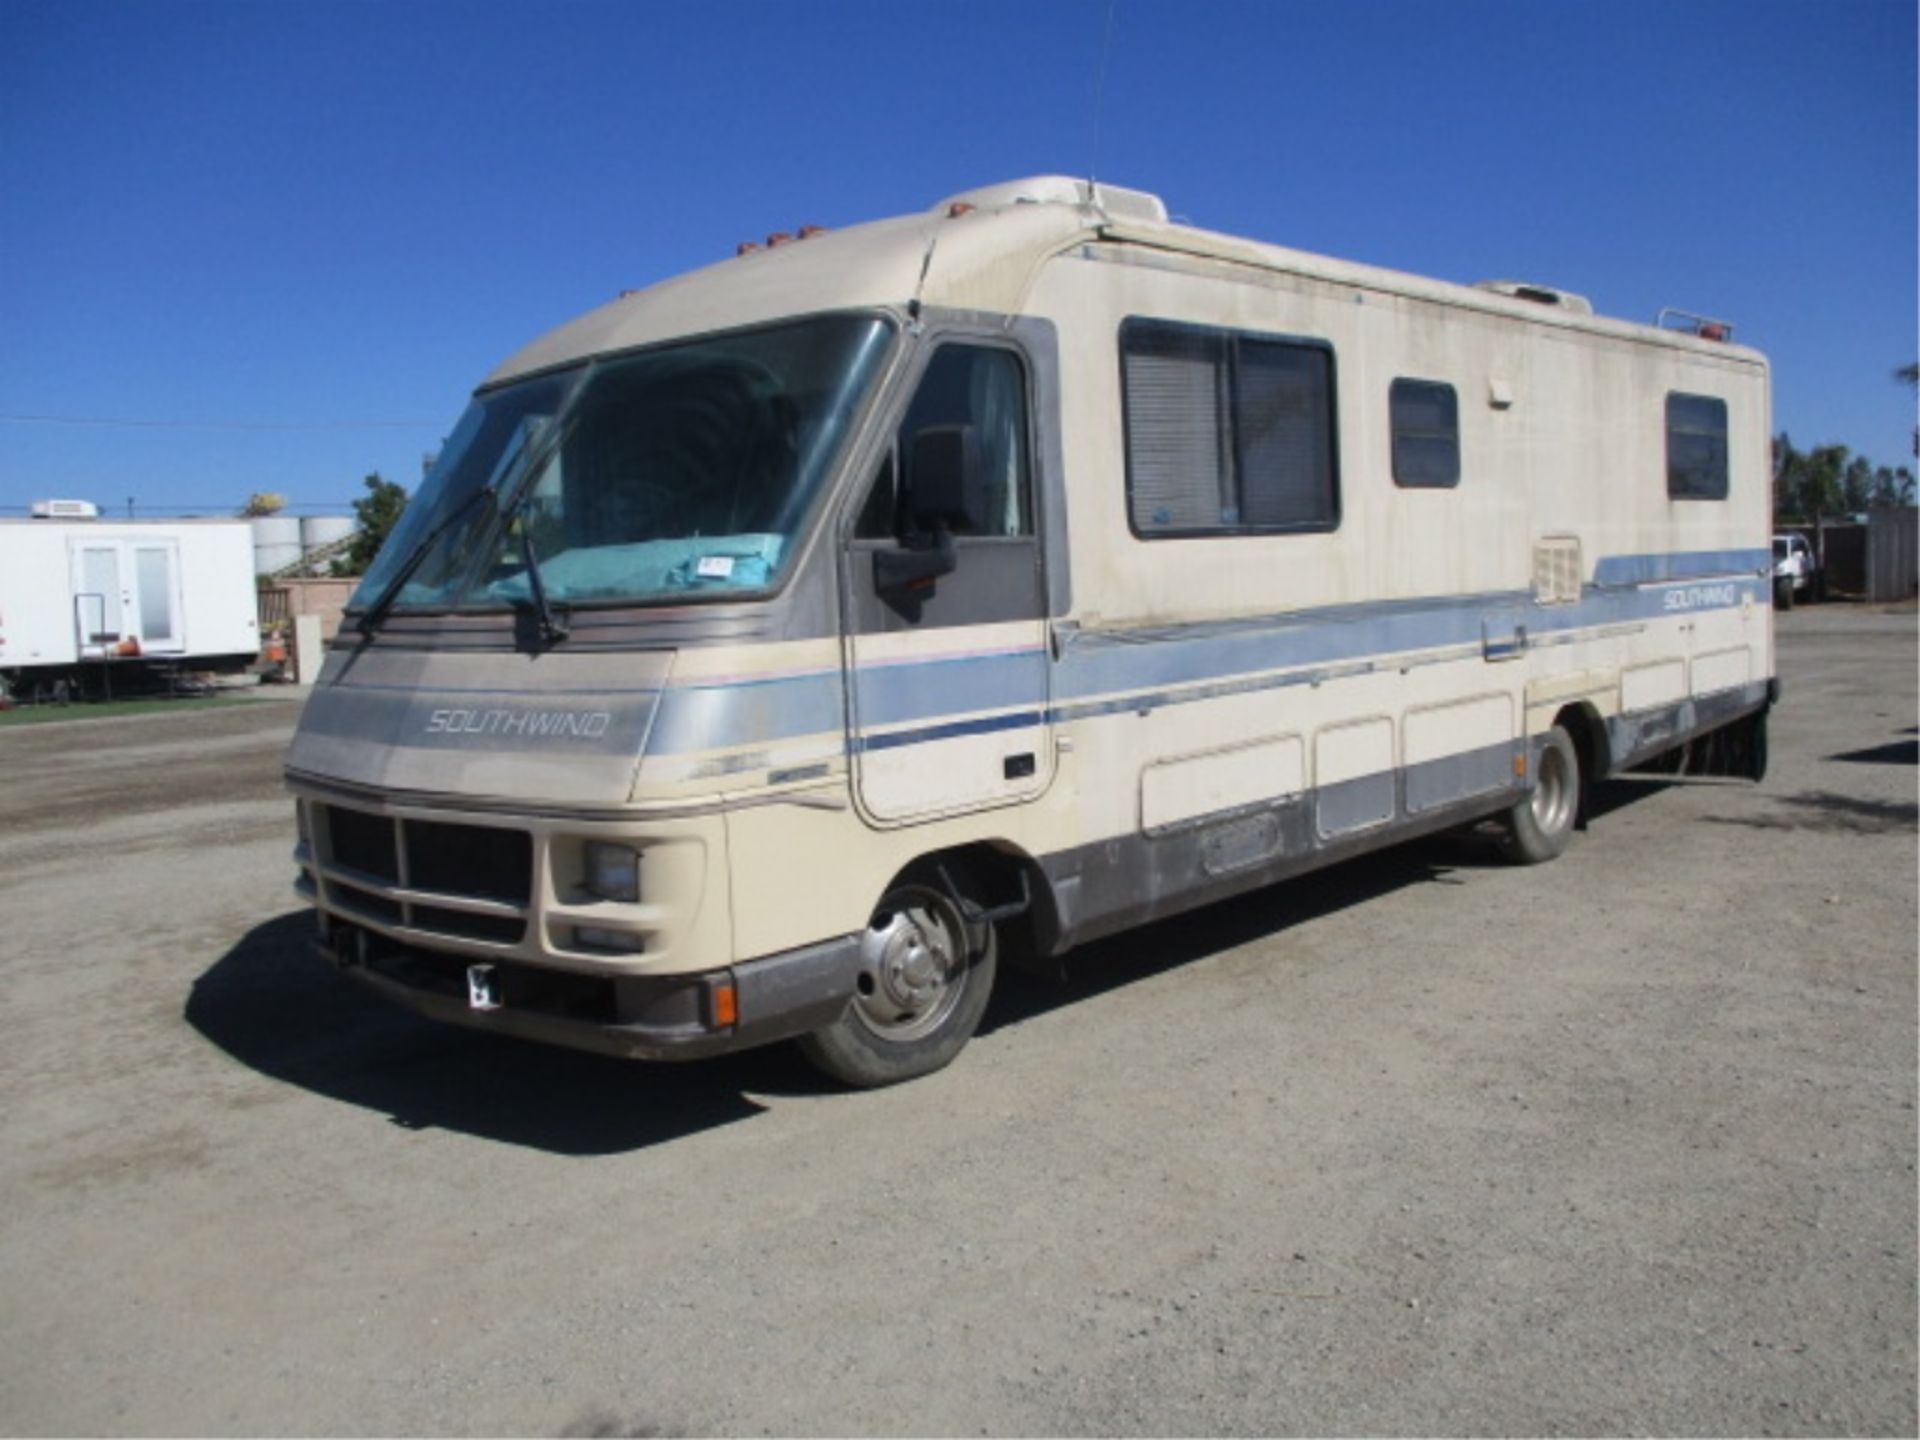 Fleetwood Southwind Motor Home, V8 Gas, Automatic, Refrigerator, Microwave, Stove, Bathroom W/ - Image 5 of 121